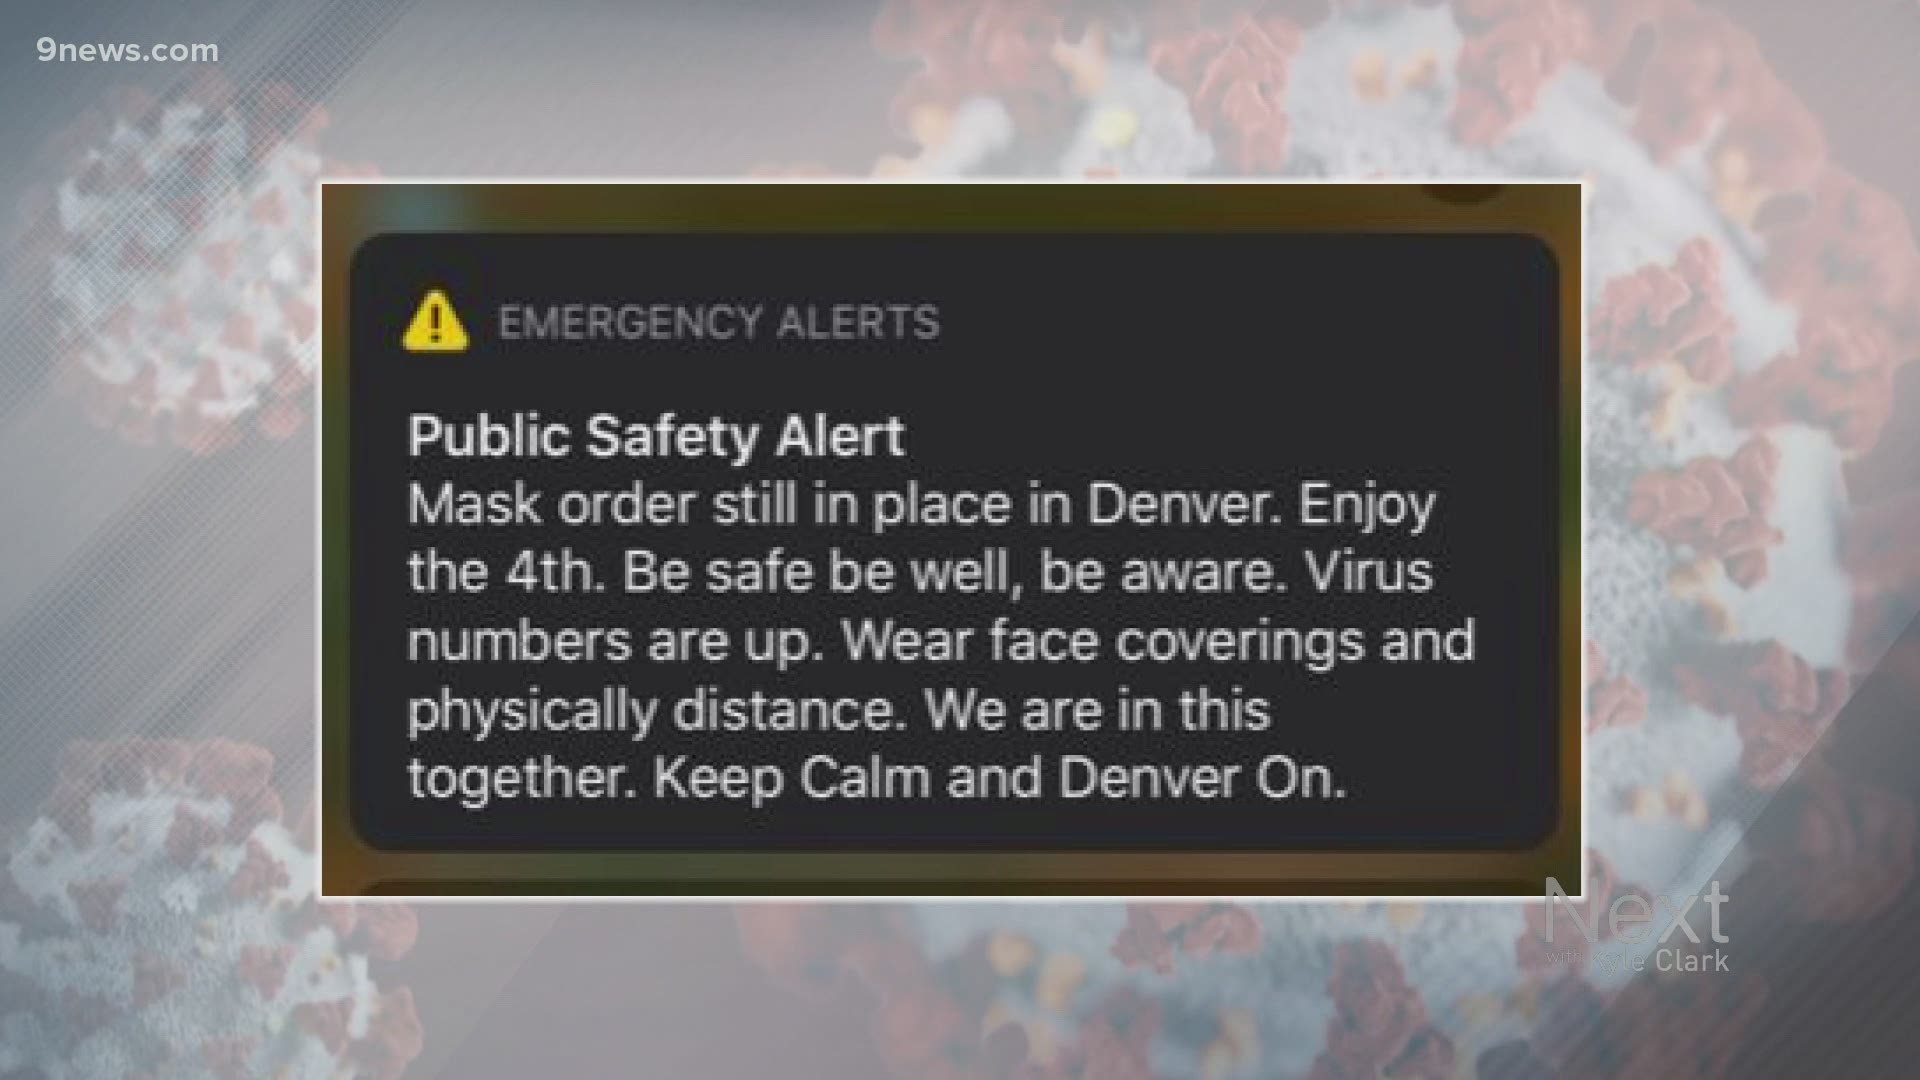 Denver sent an emergency alert to cell phones ahead of 4th of July, casually reminding people to wear masks during the COVID-19 pandemic.